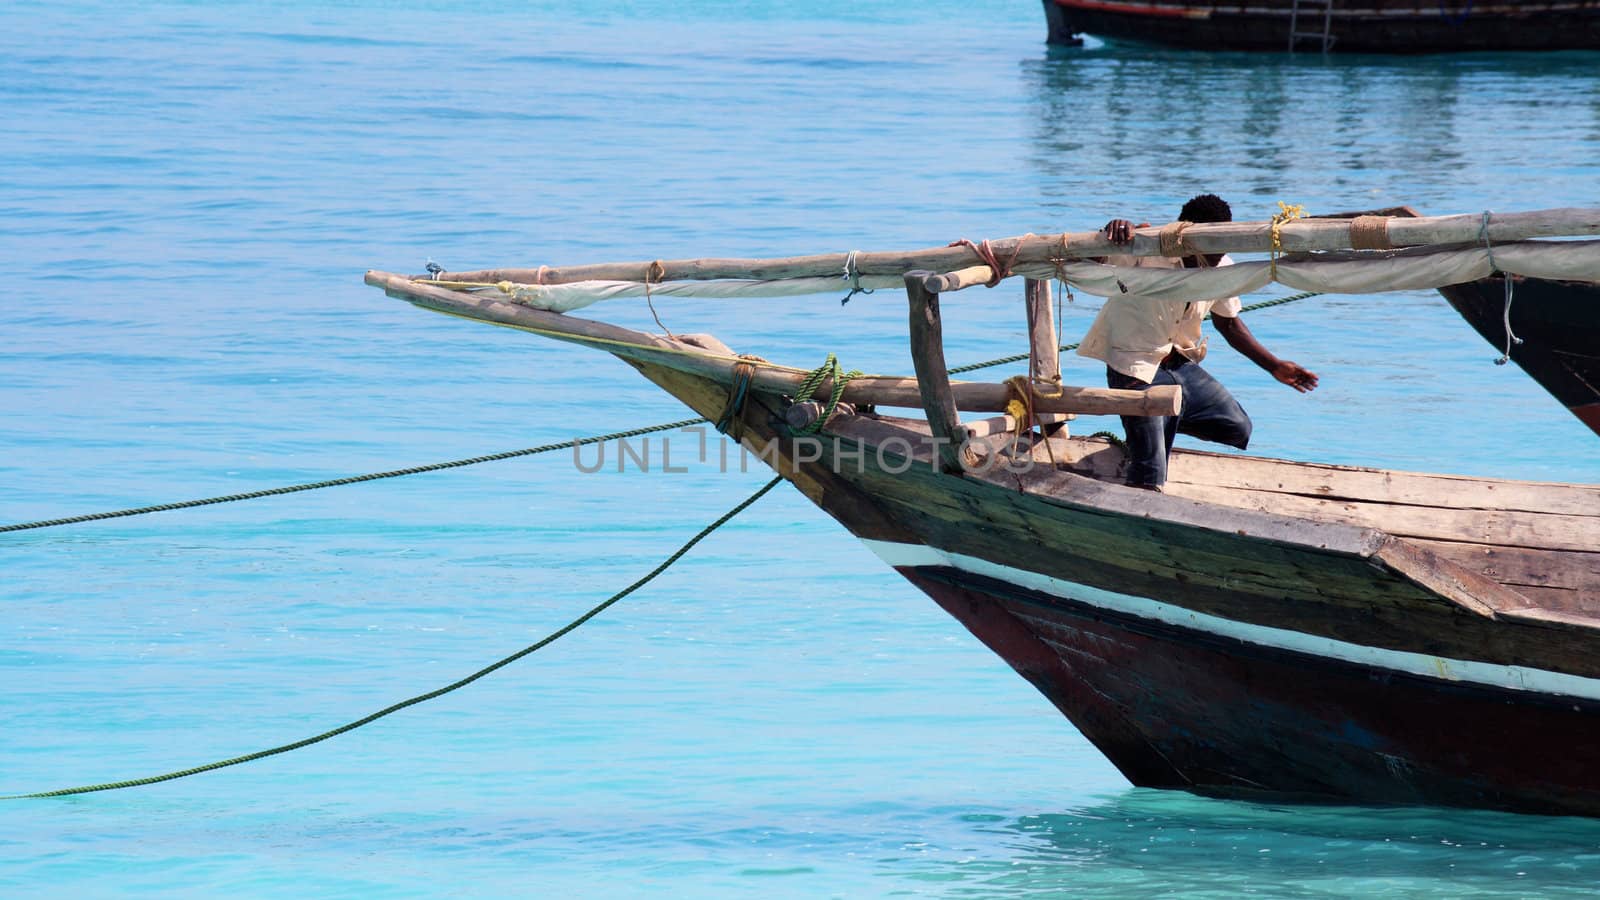 A fisherman and his boat on a quiet sunny day